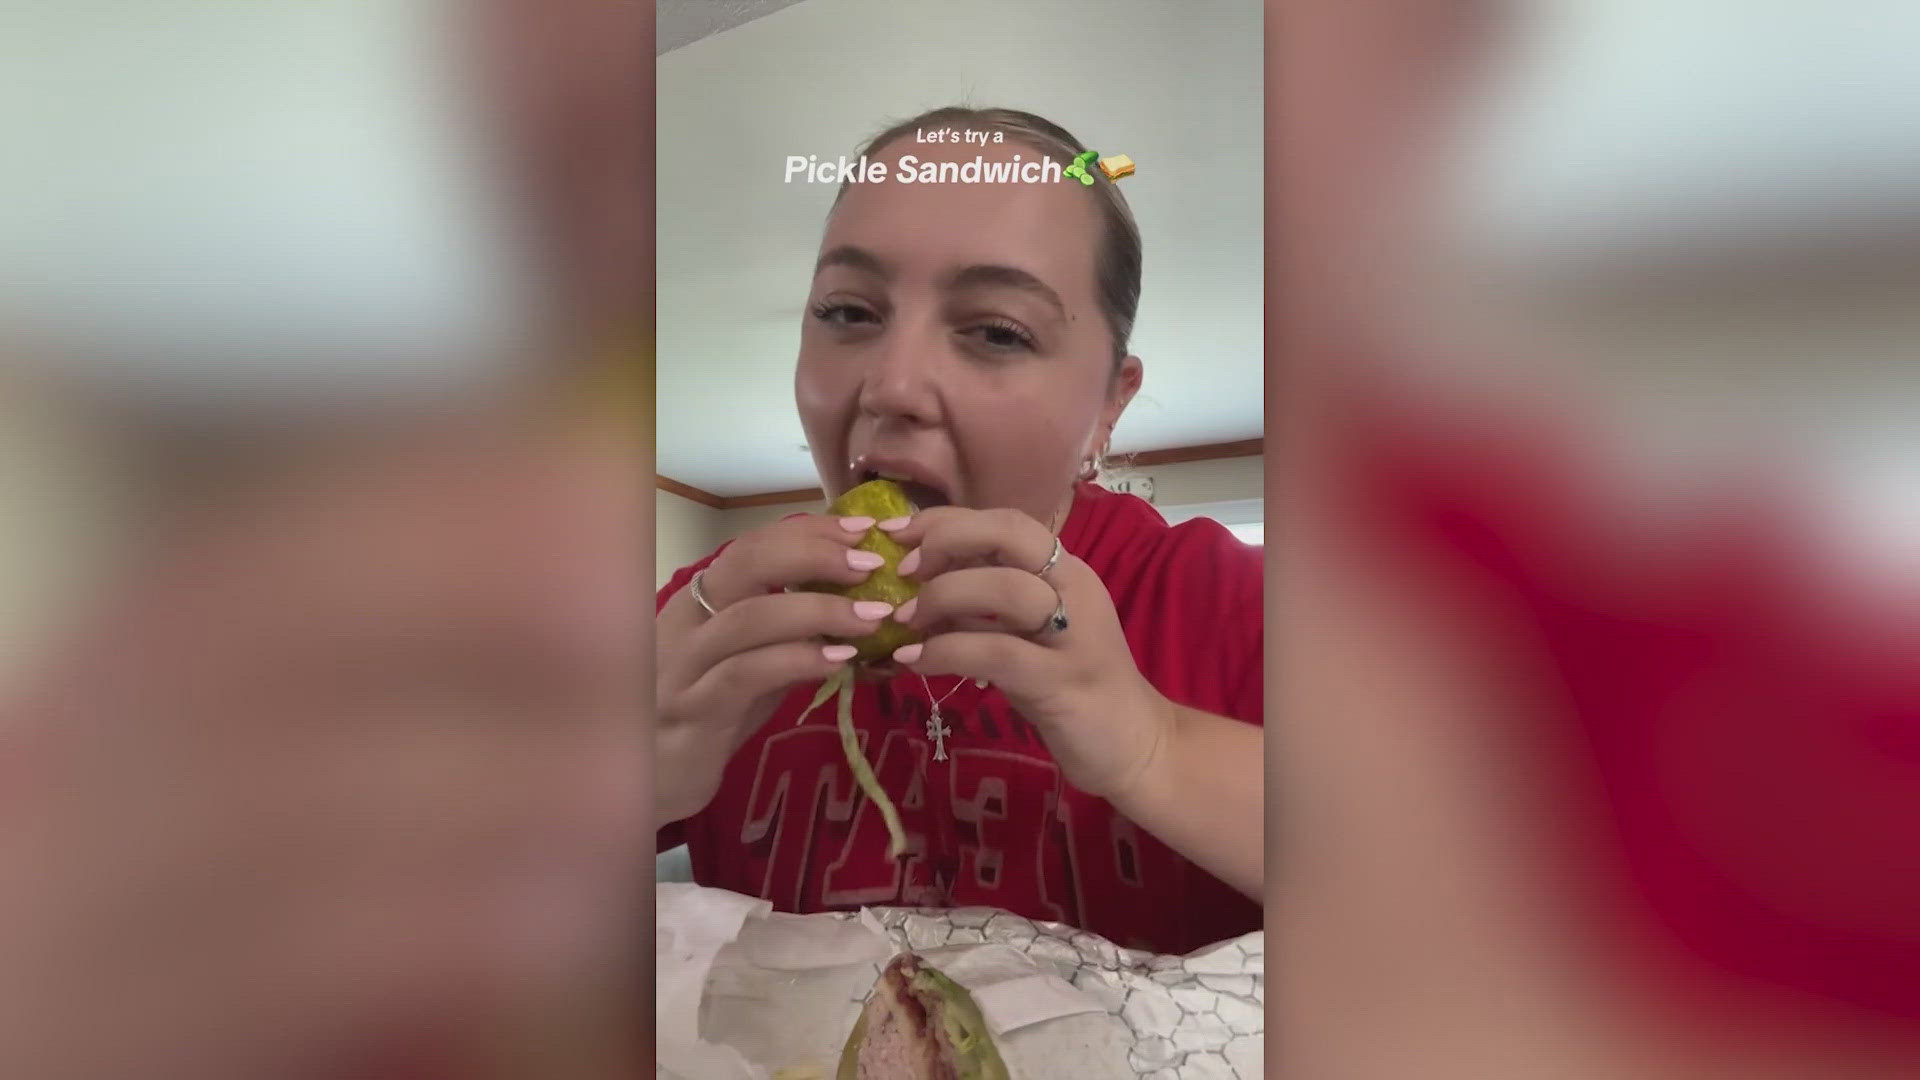 An Italian deli in New York is becoming a big “dill” on TikTok for one of its culinary creations.